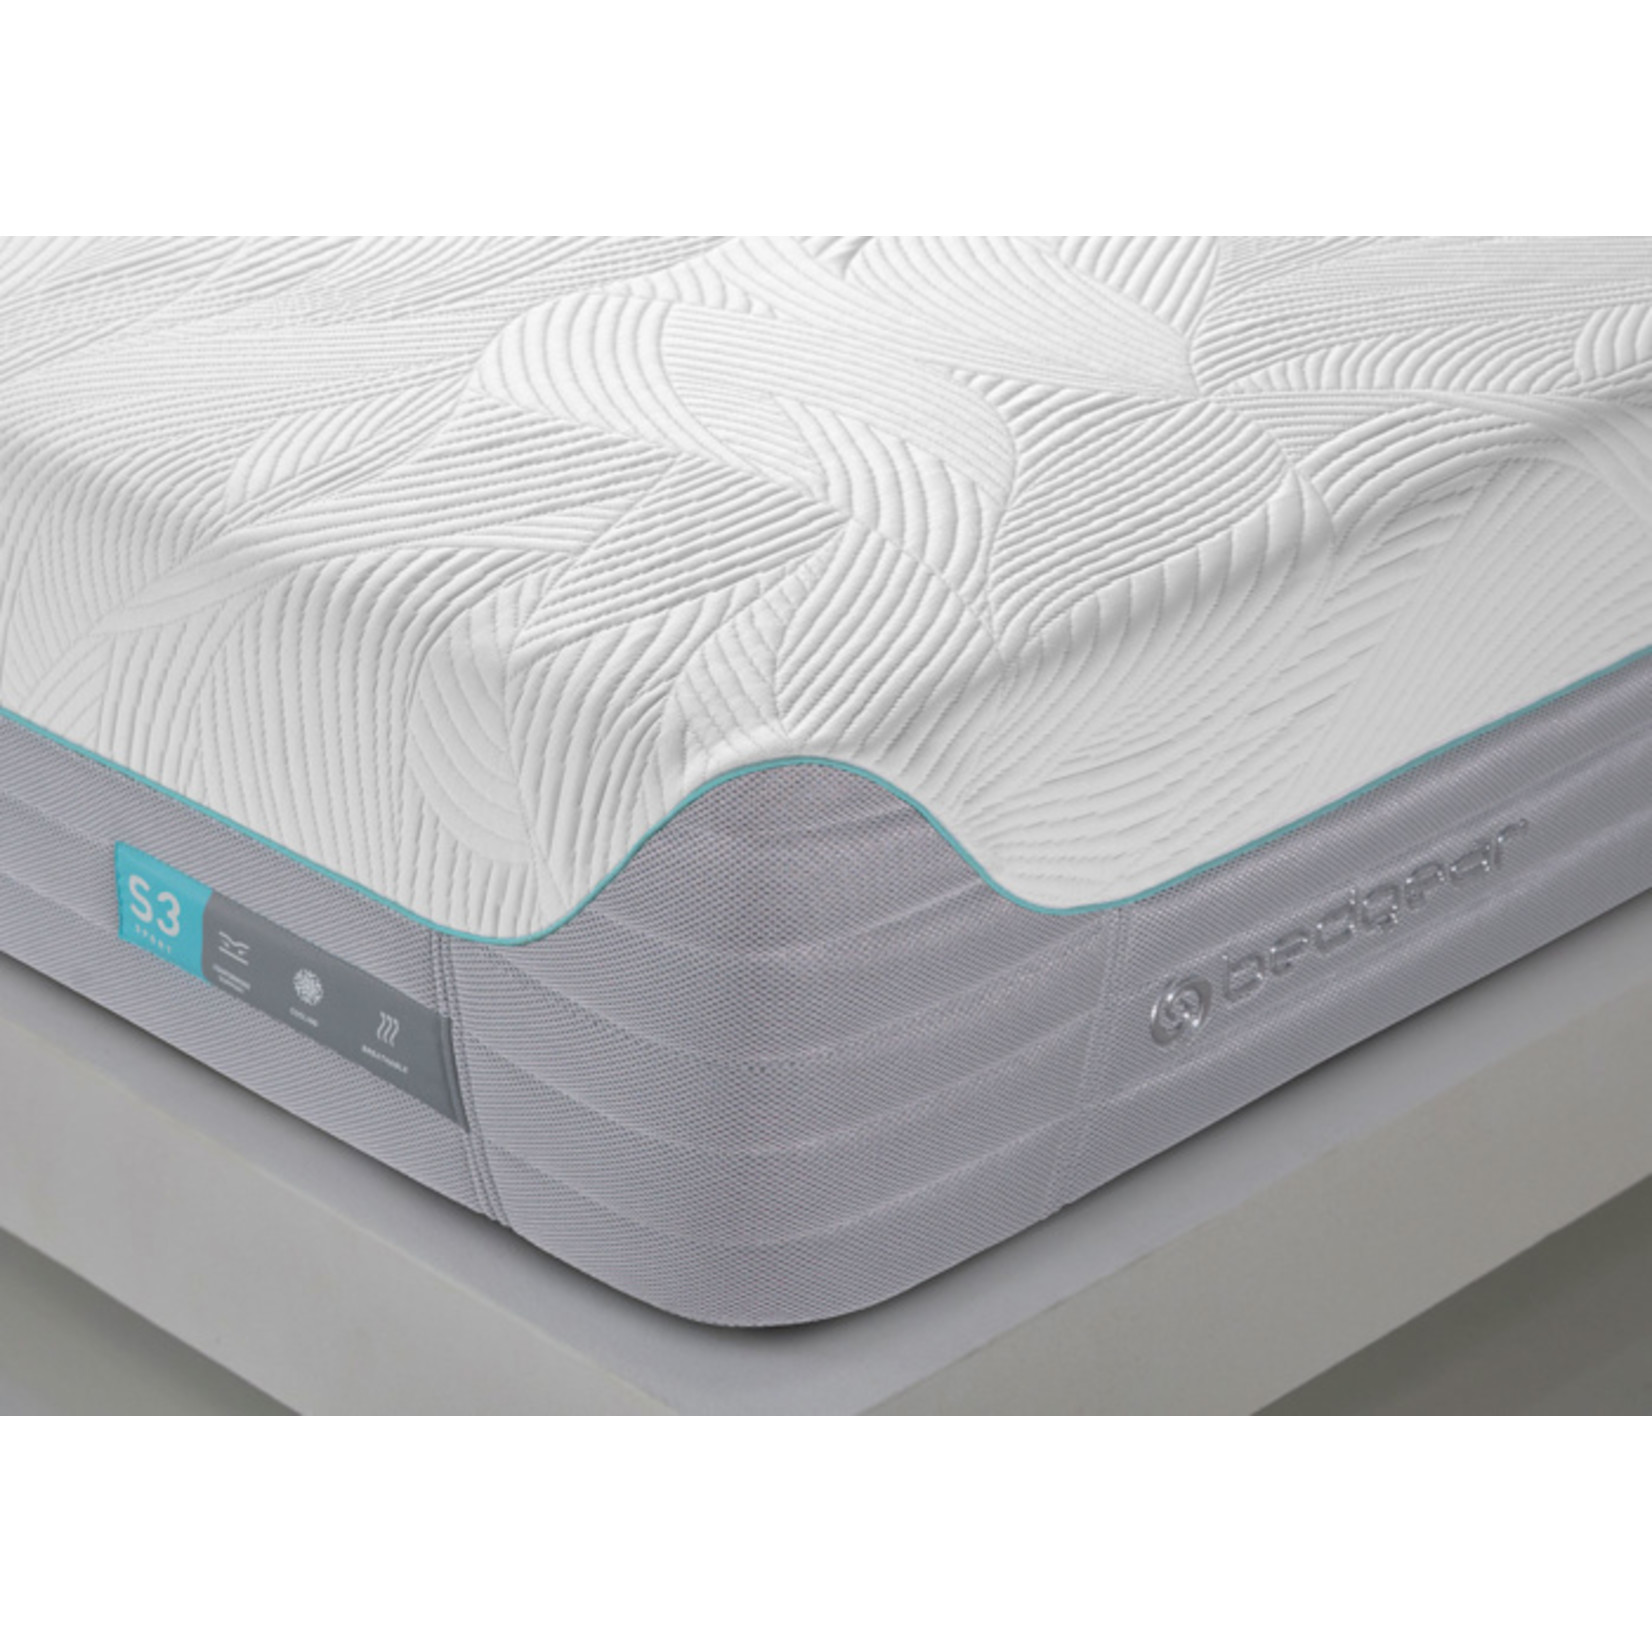 S3 Firm Performance Mattress Bed in a Box